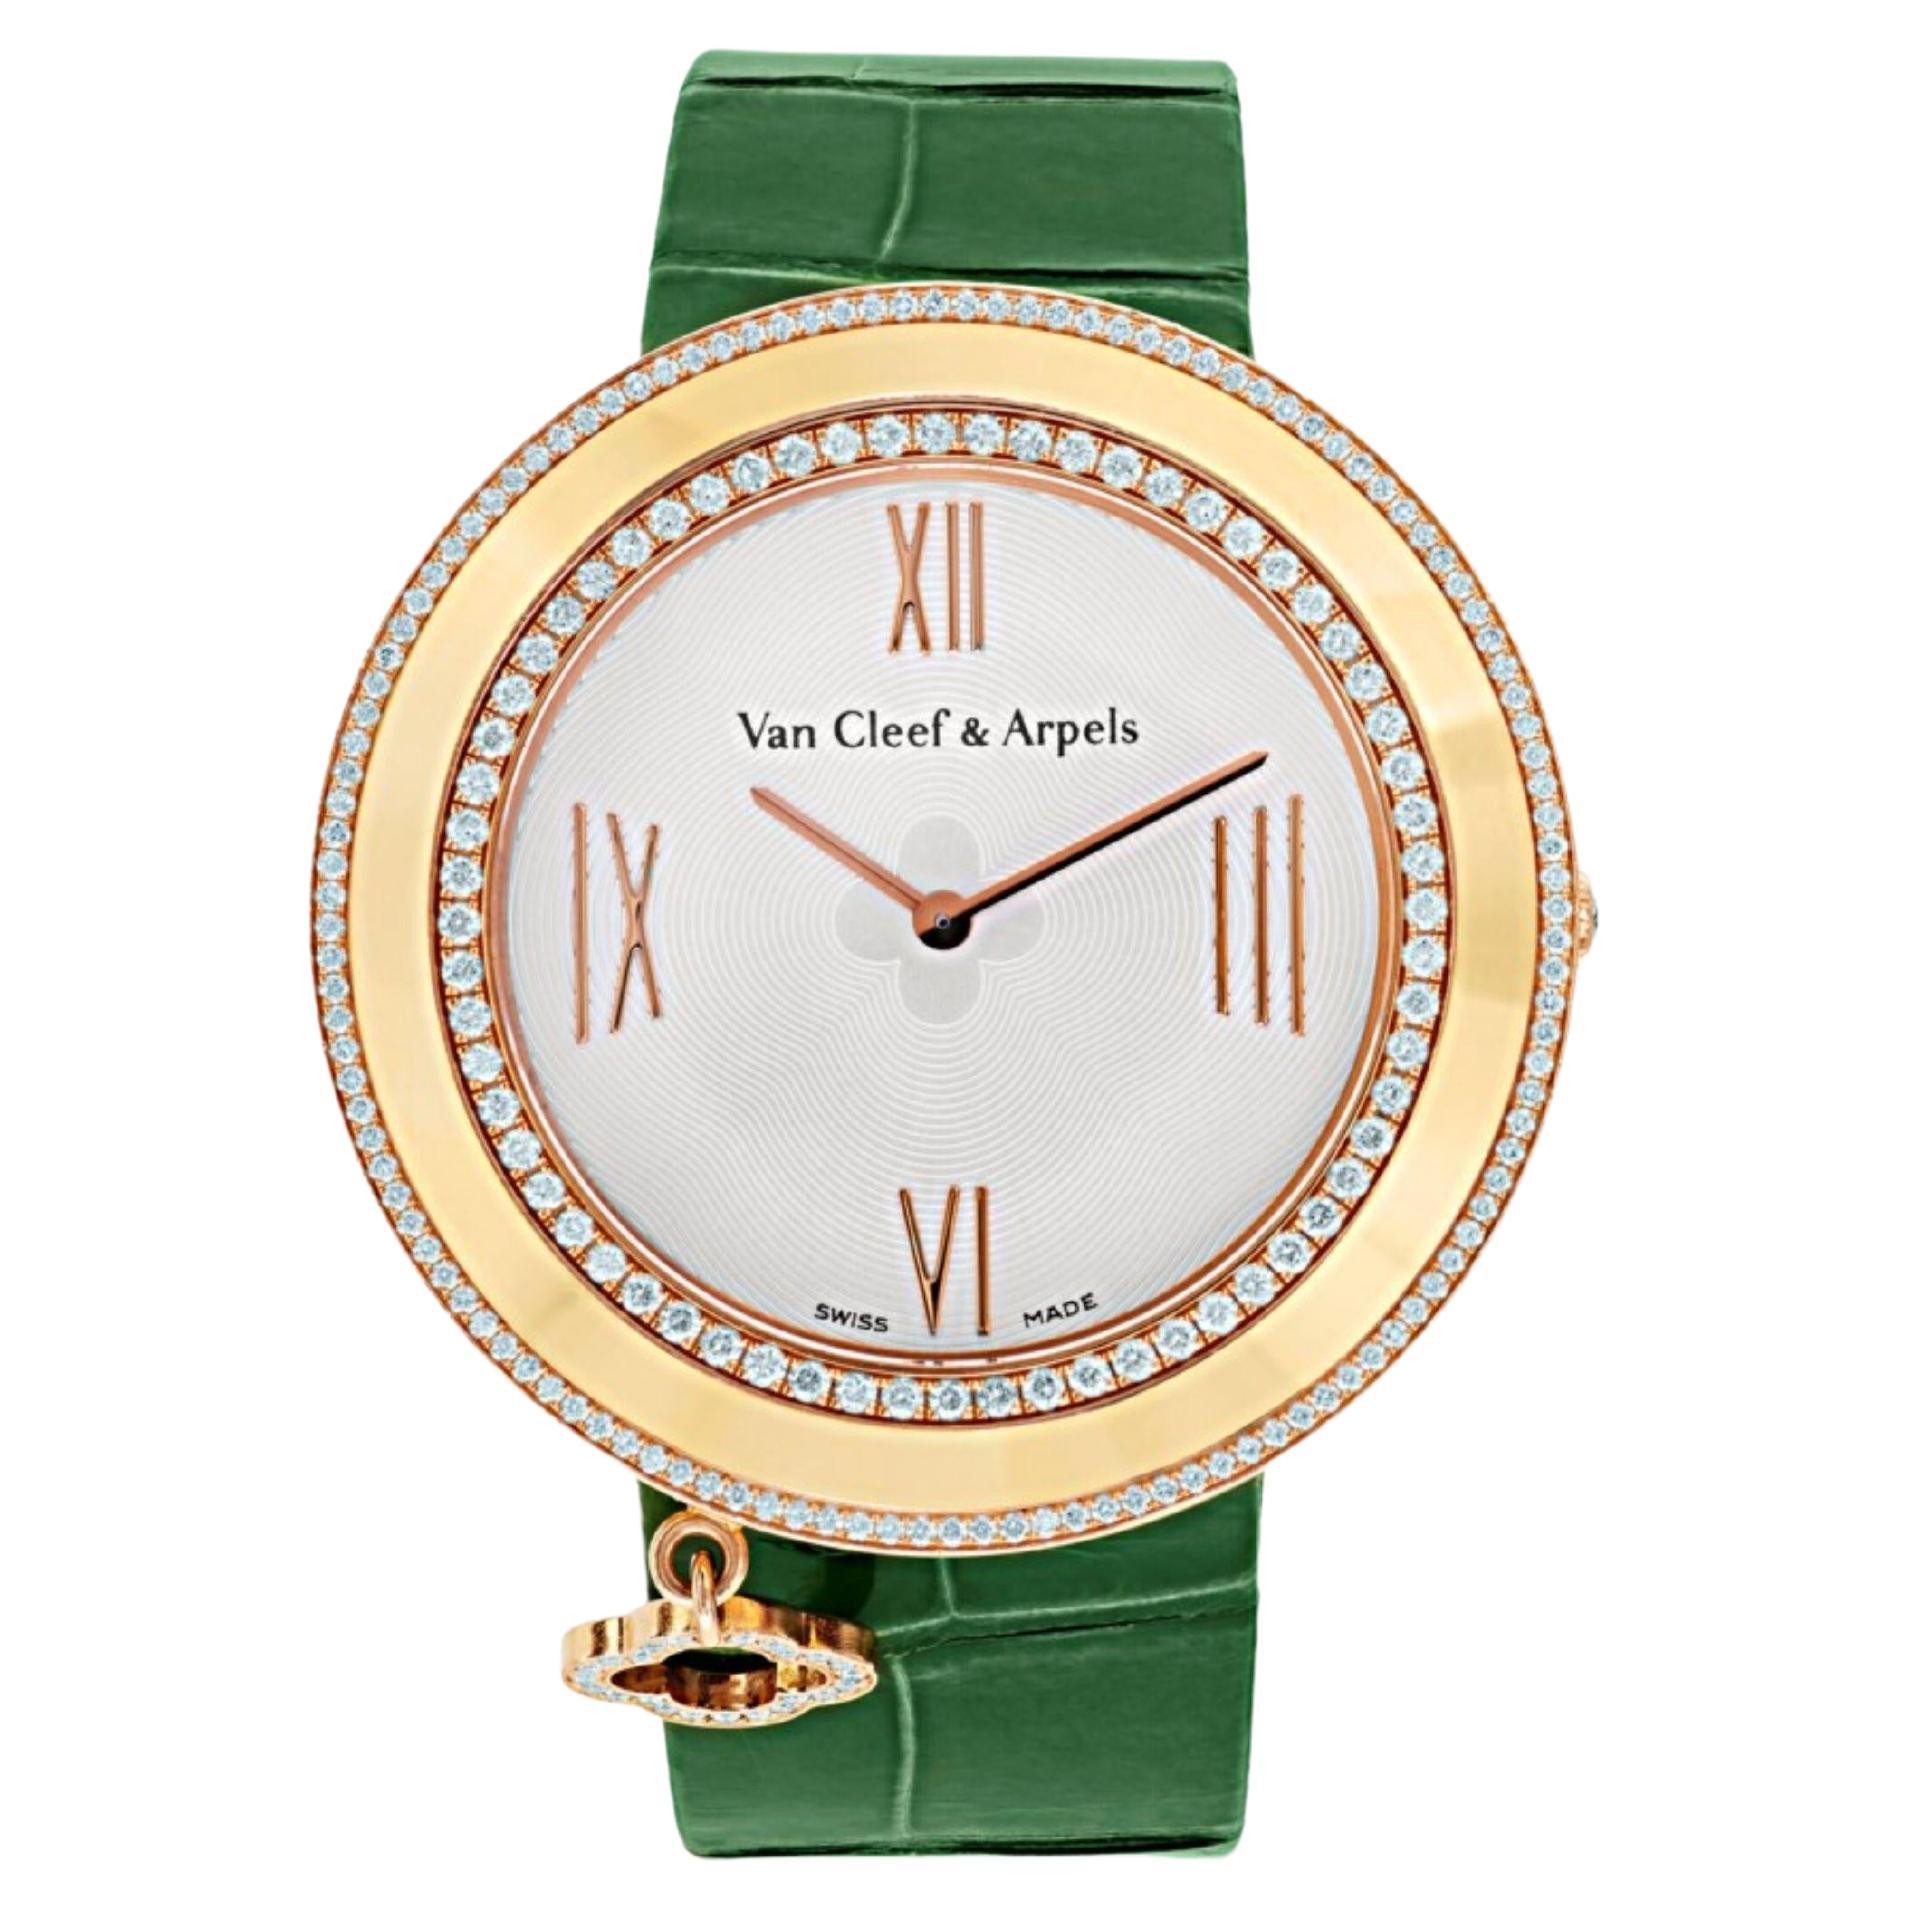 Van Cleef & Arpels Diamond 18k Gold 38mm Charms Watch 2572115 With Box & Papers For Sale